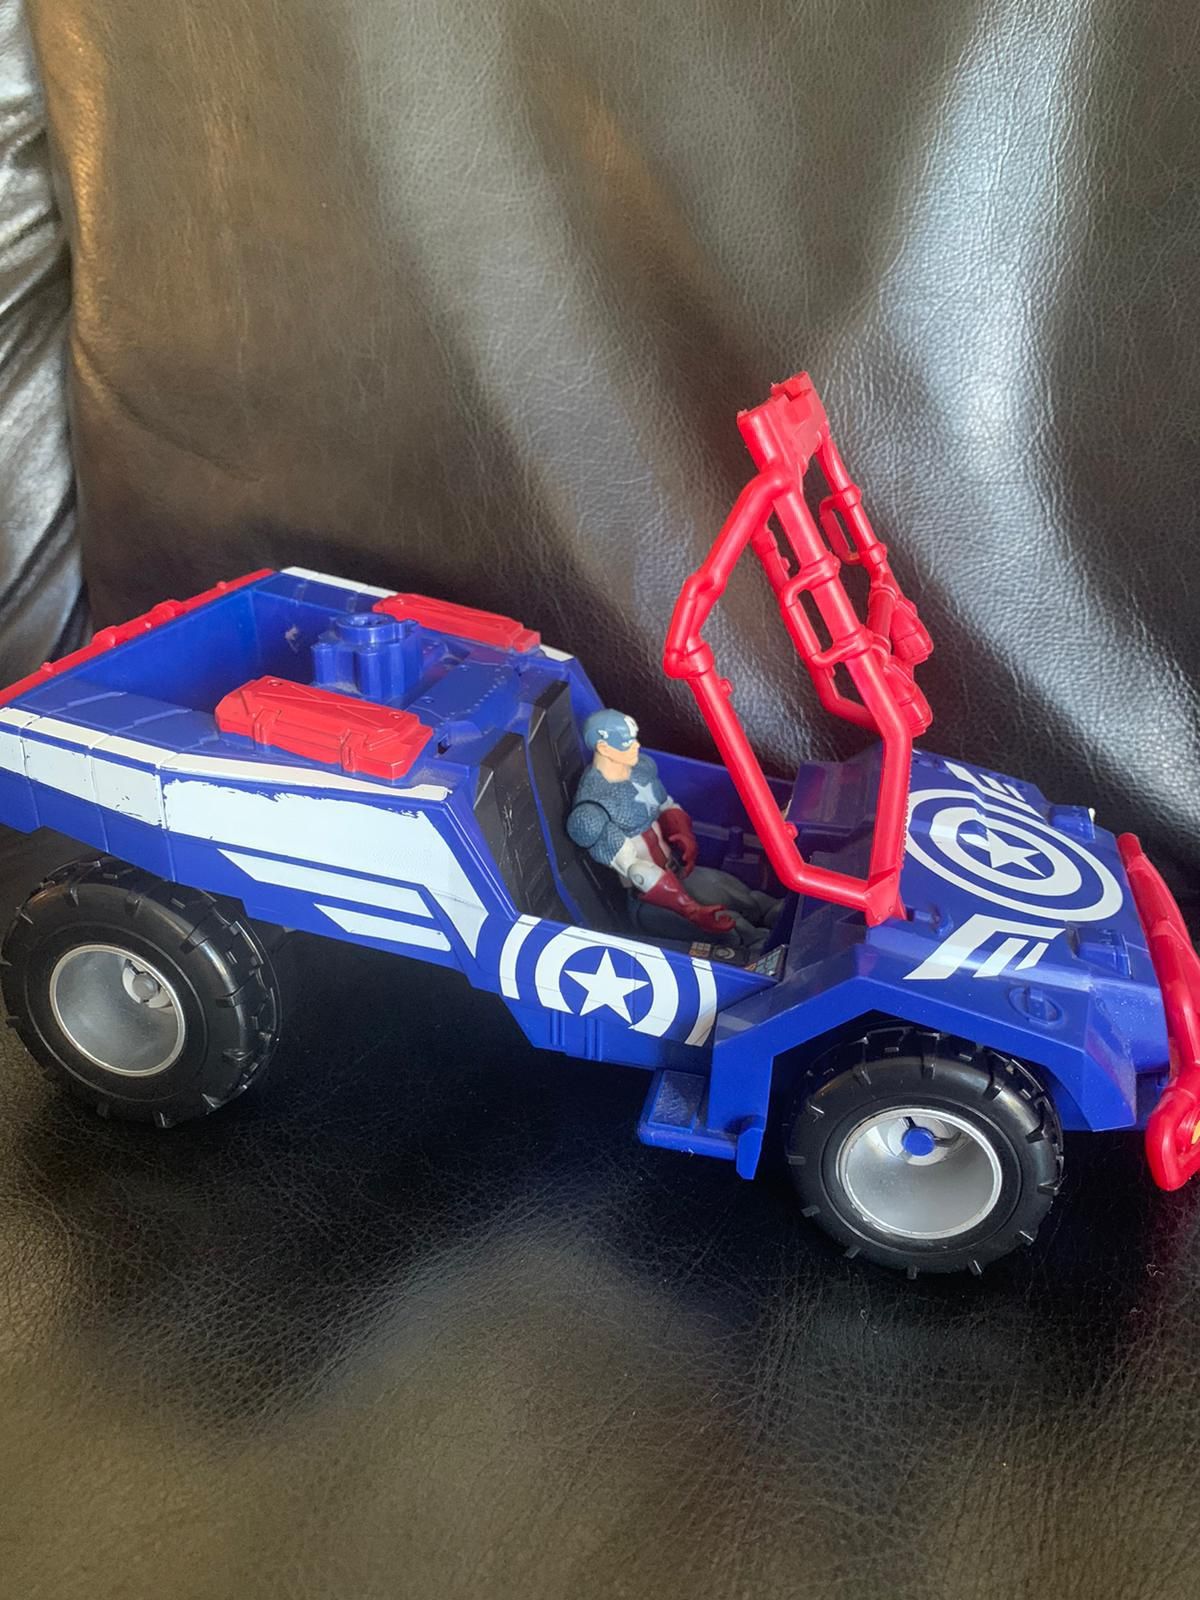 Captain America with car